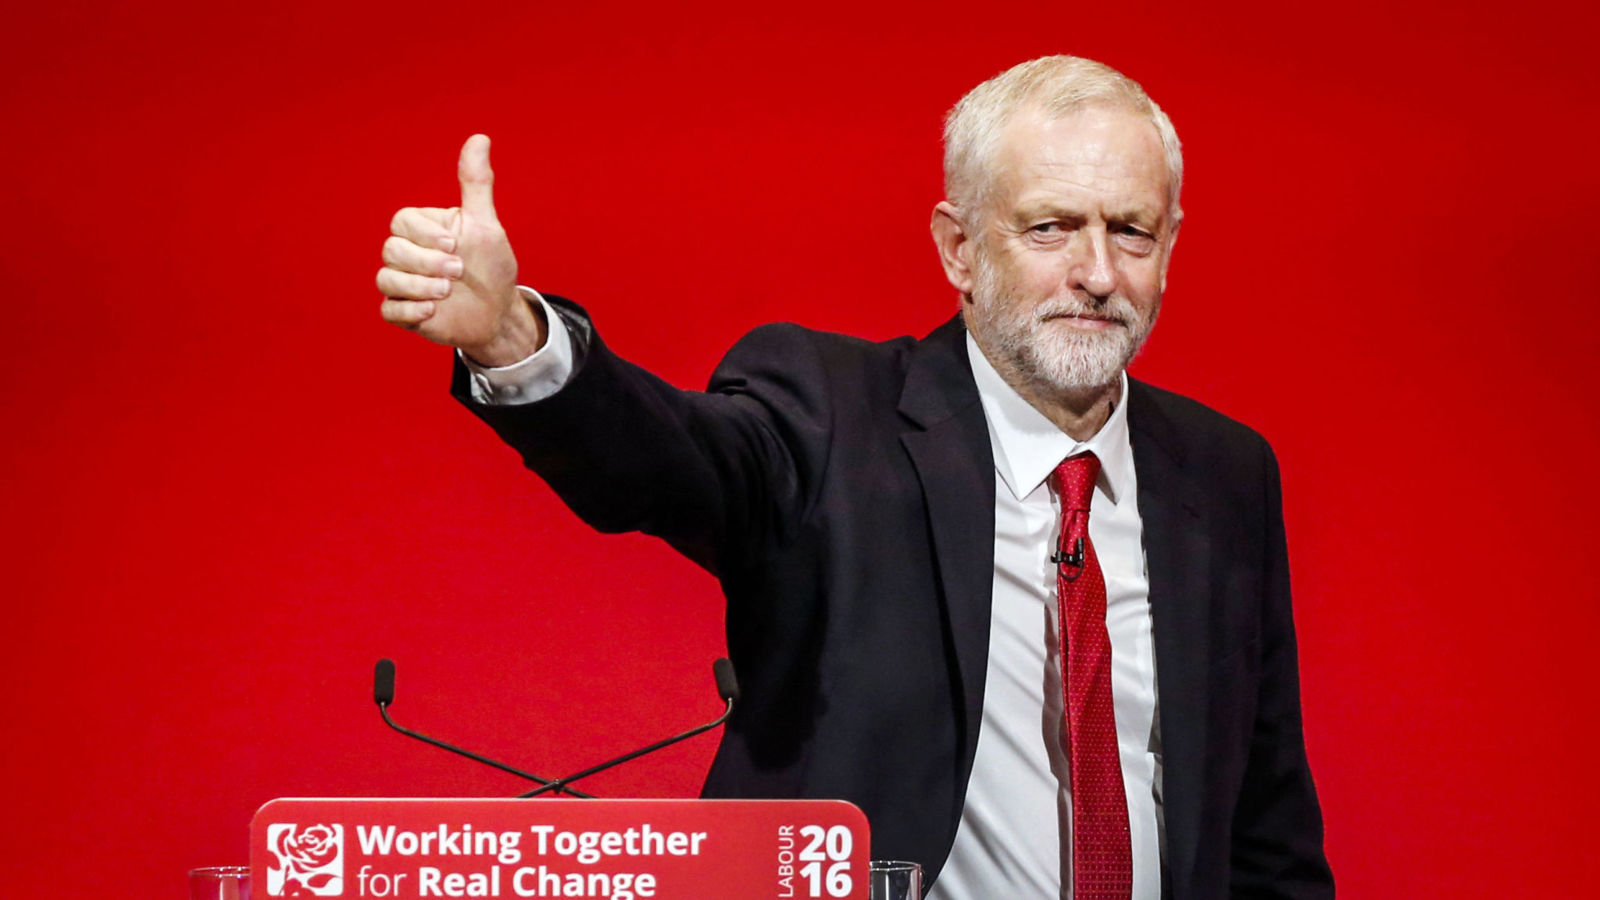 Jeremy Corbyn, Labour Party, People’s Assembly Against Austerity, UK austerity cut, Tory policies